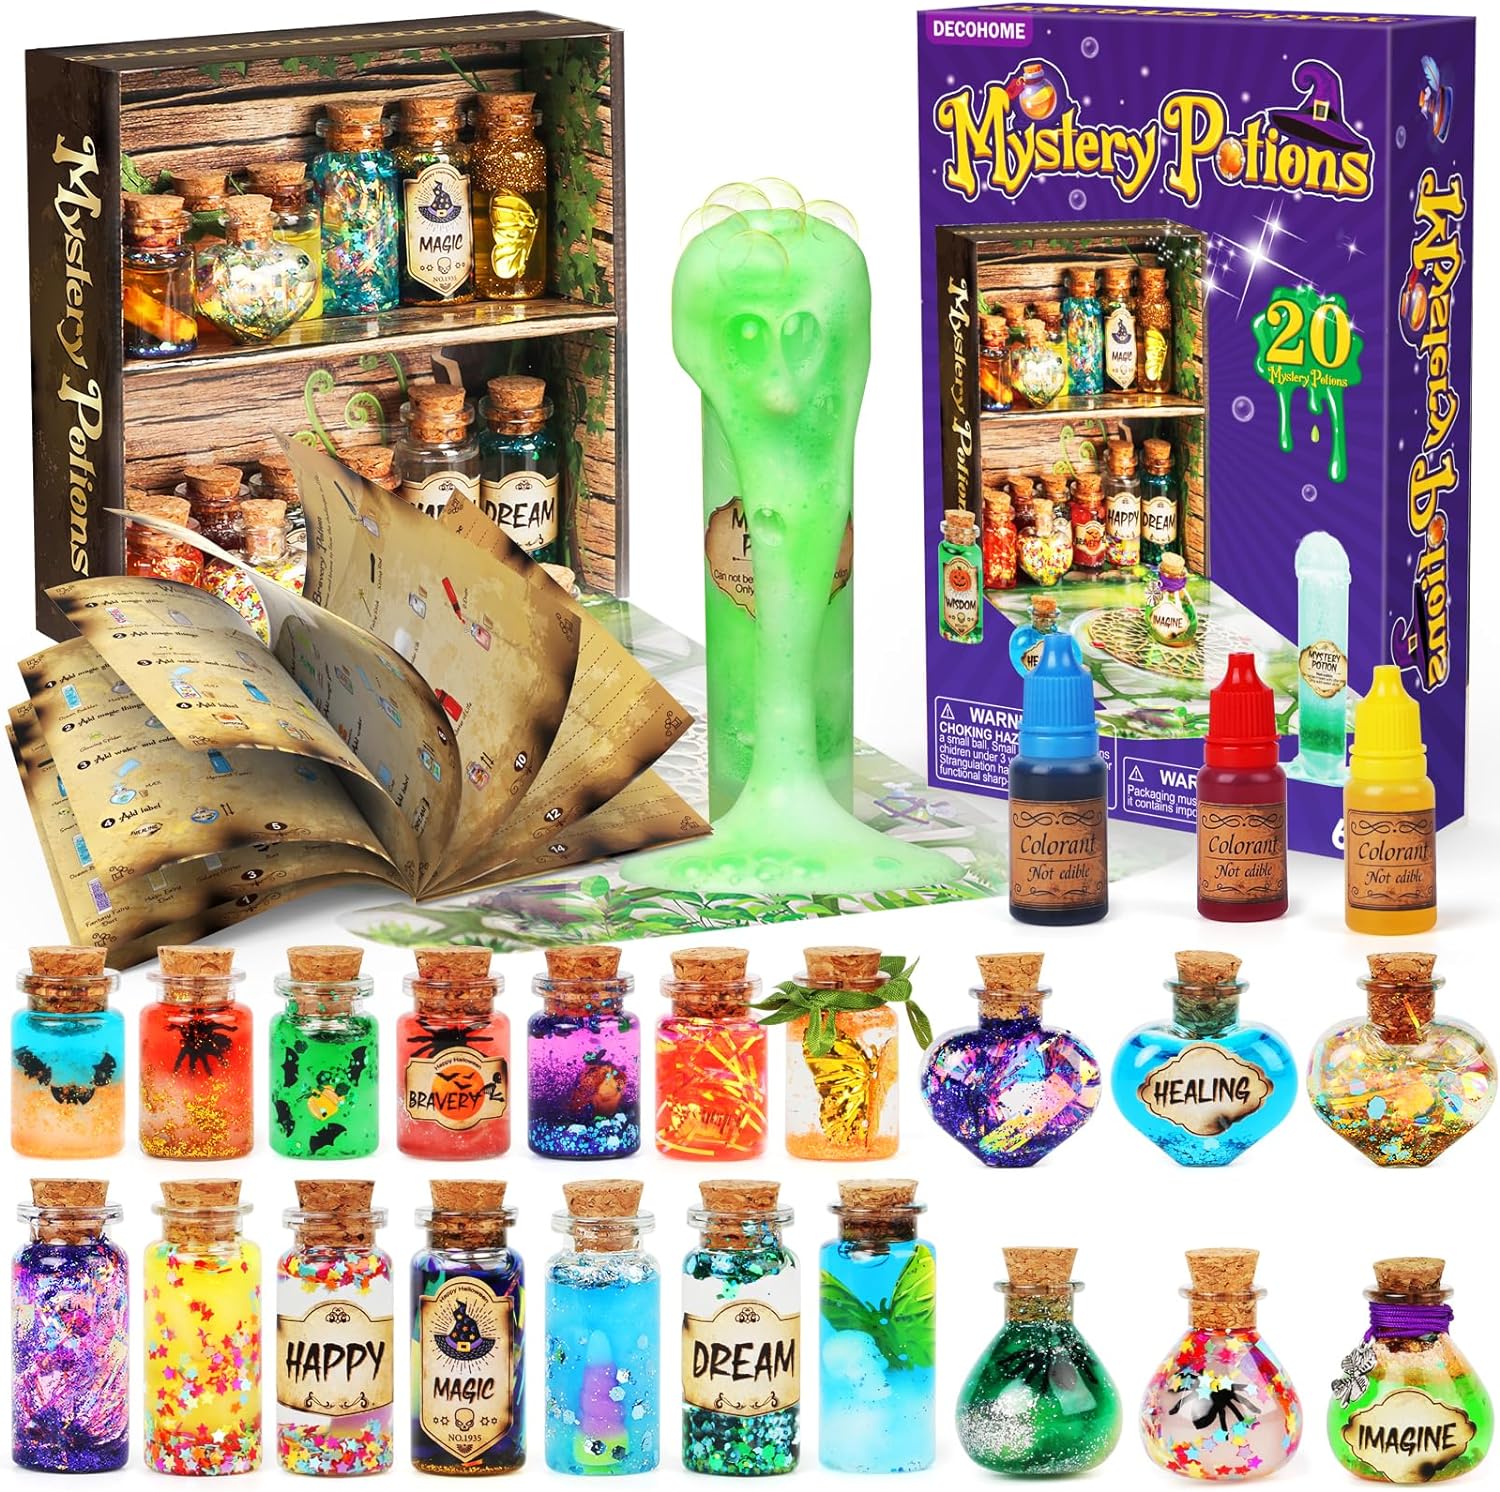 Limited Time Offer: DECOHOME Mystery Potions Kit for Kids - Save 47%!